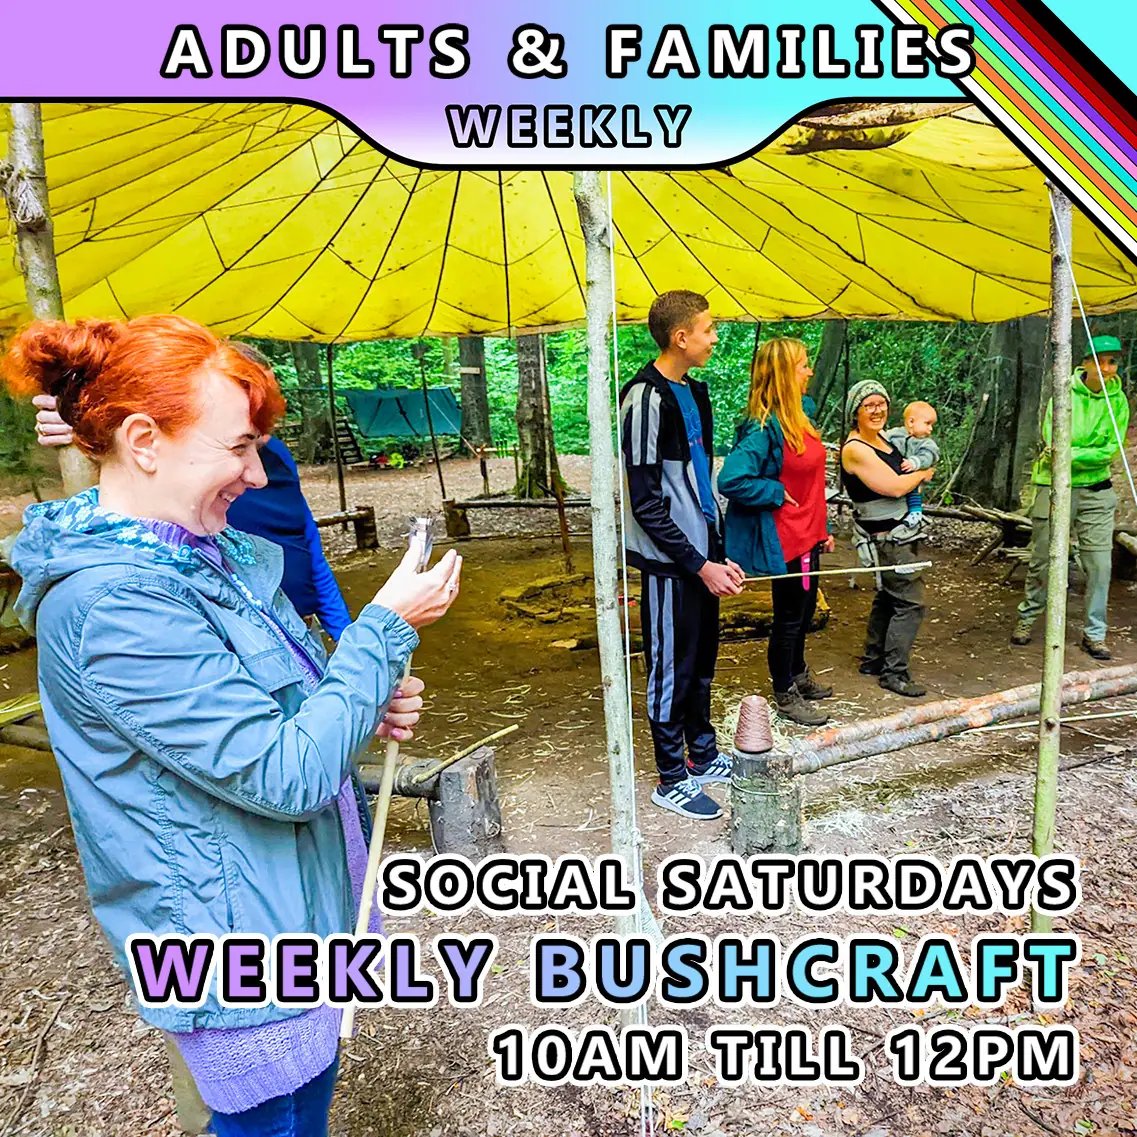 bushcraft social saturday session for adults and families at TRIBE with honours